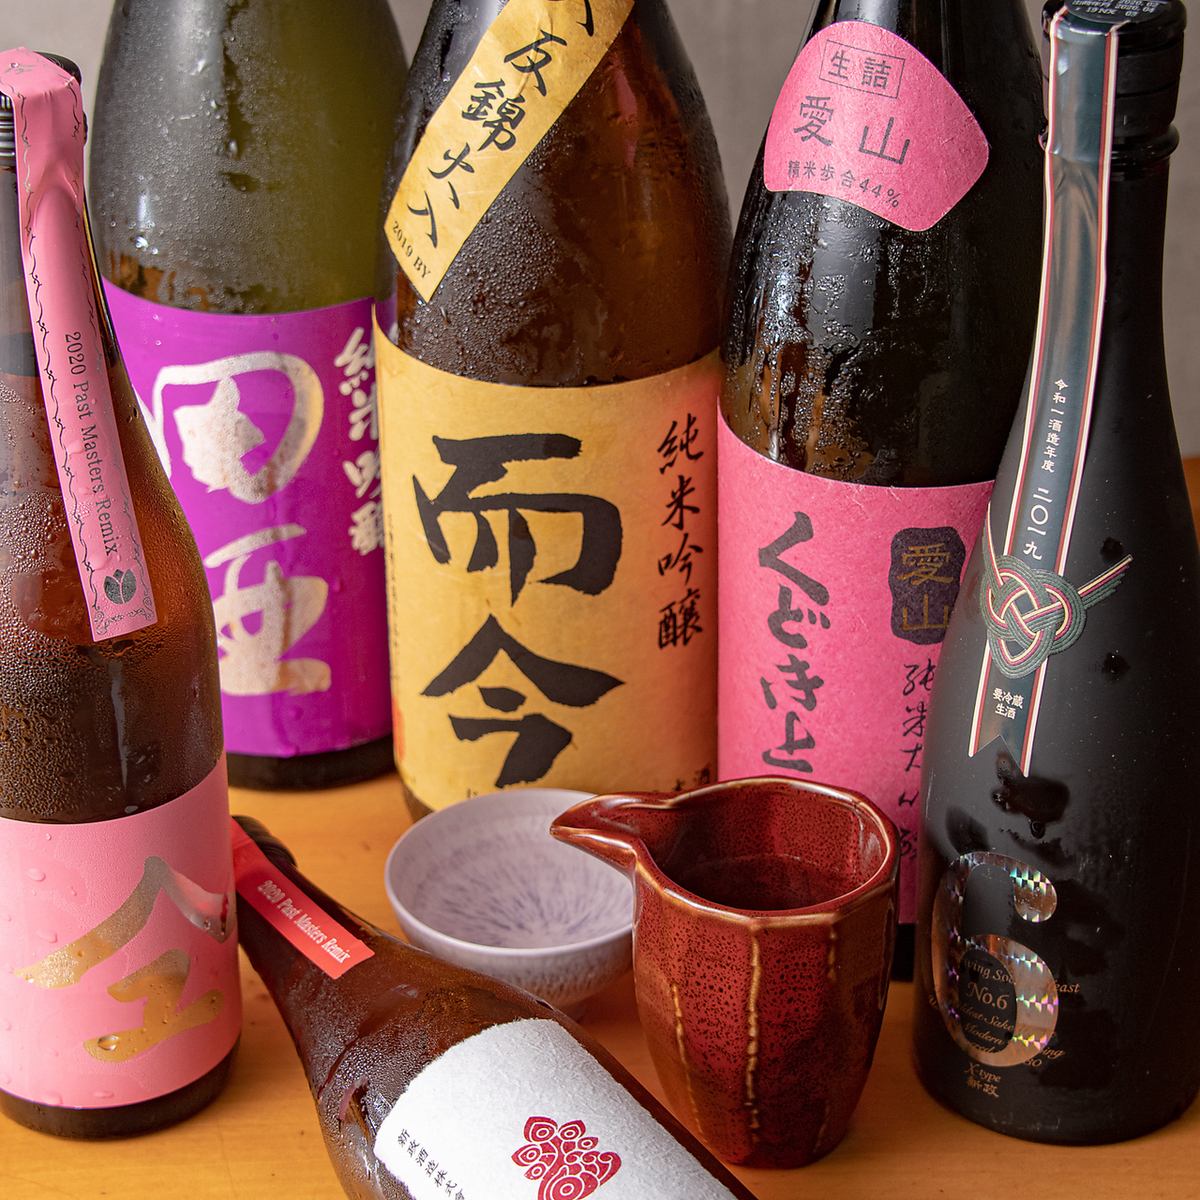 We also have sake and local sake carefully selected by the owner ♪